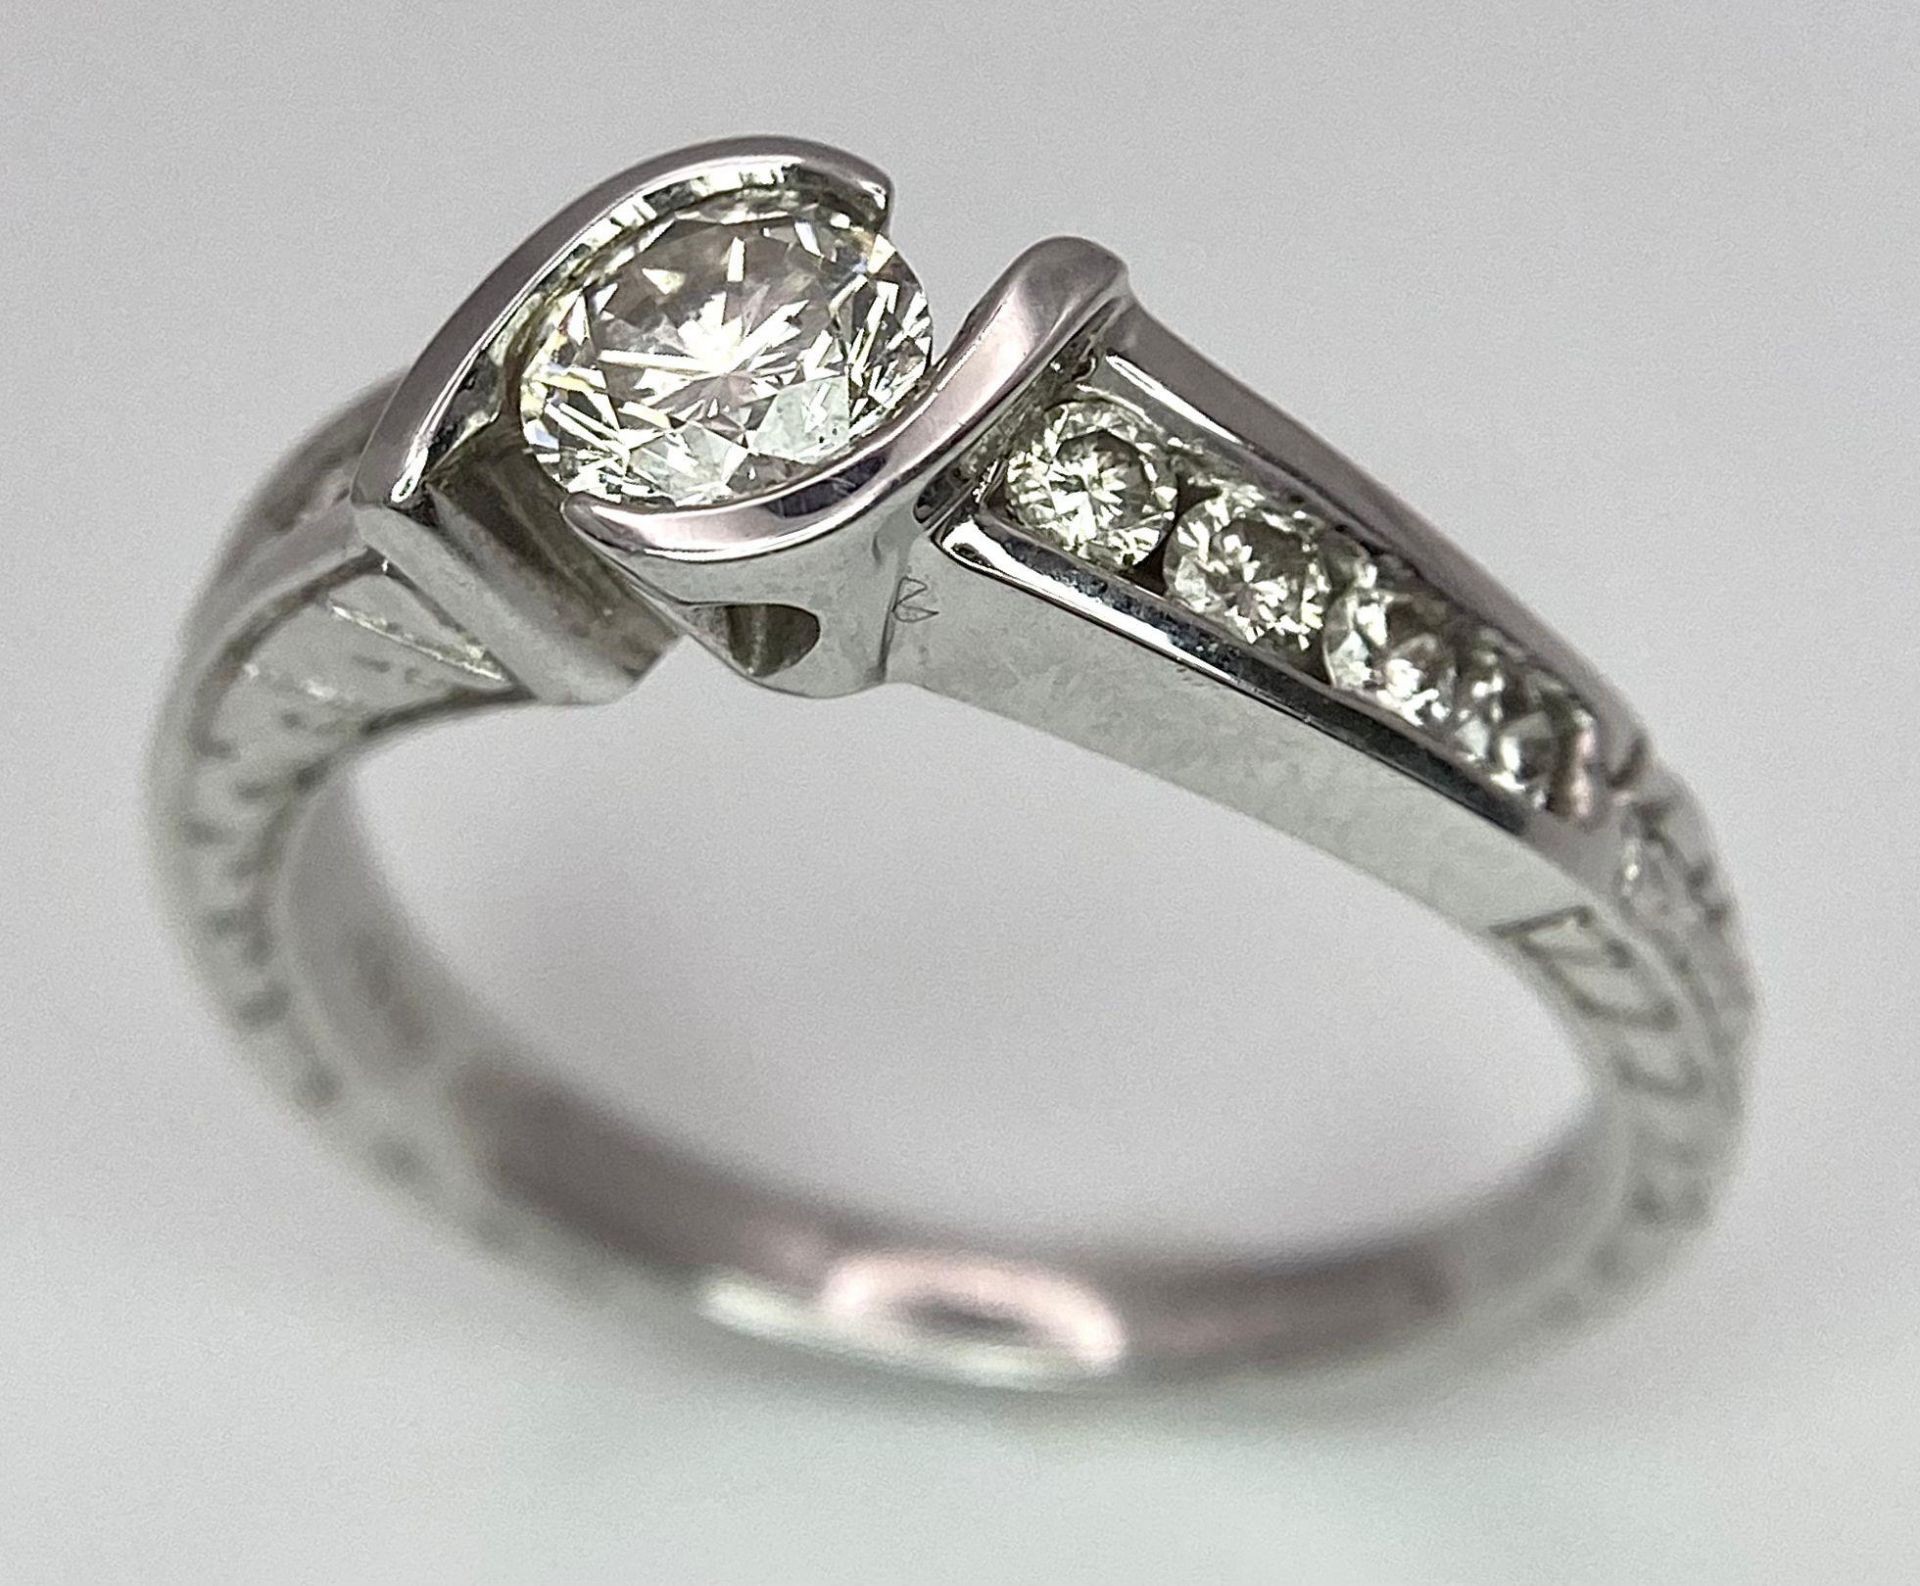 An 18K White Gold Diamond Crossover Ring. 0.50ct tinted brilliant round cut diamond with eight round